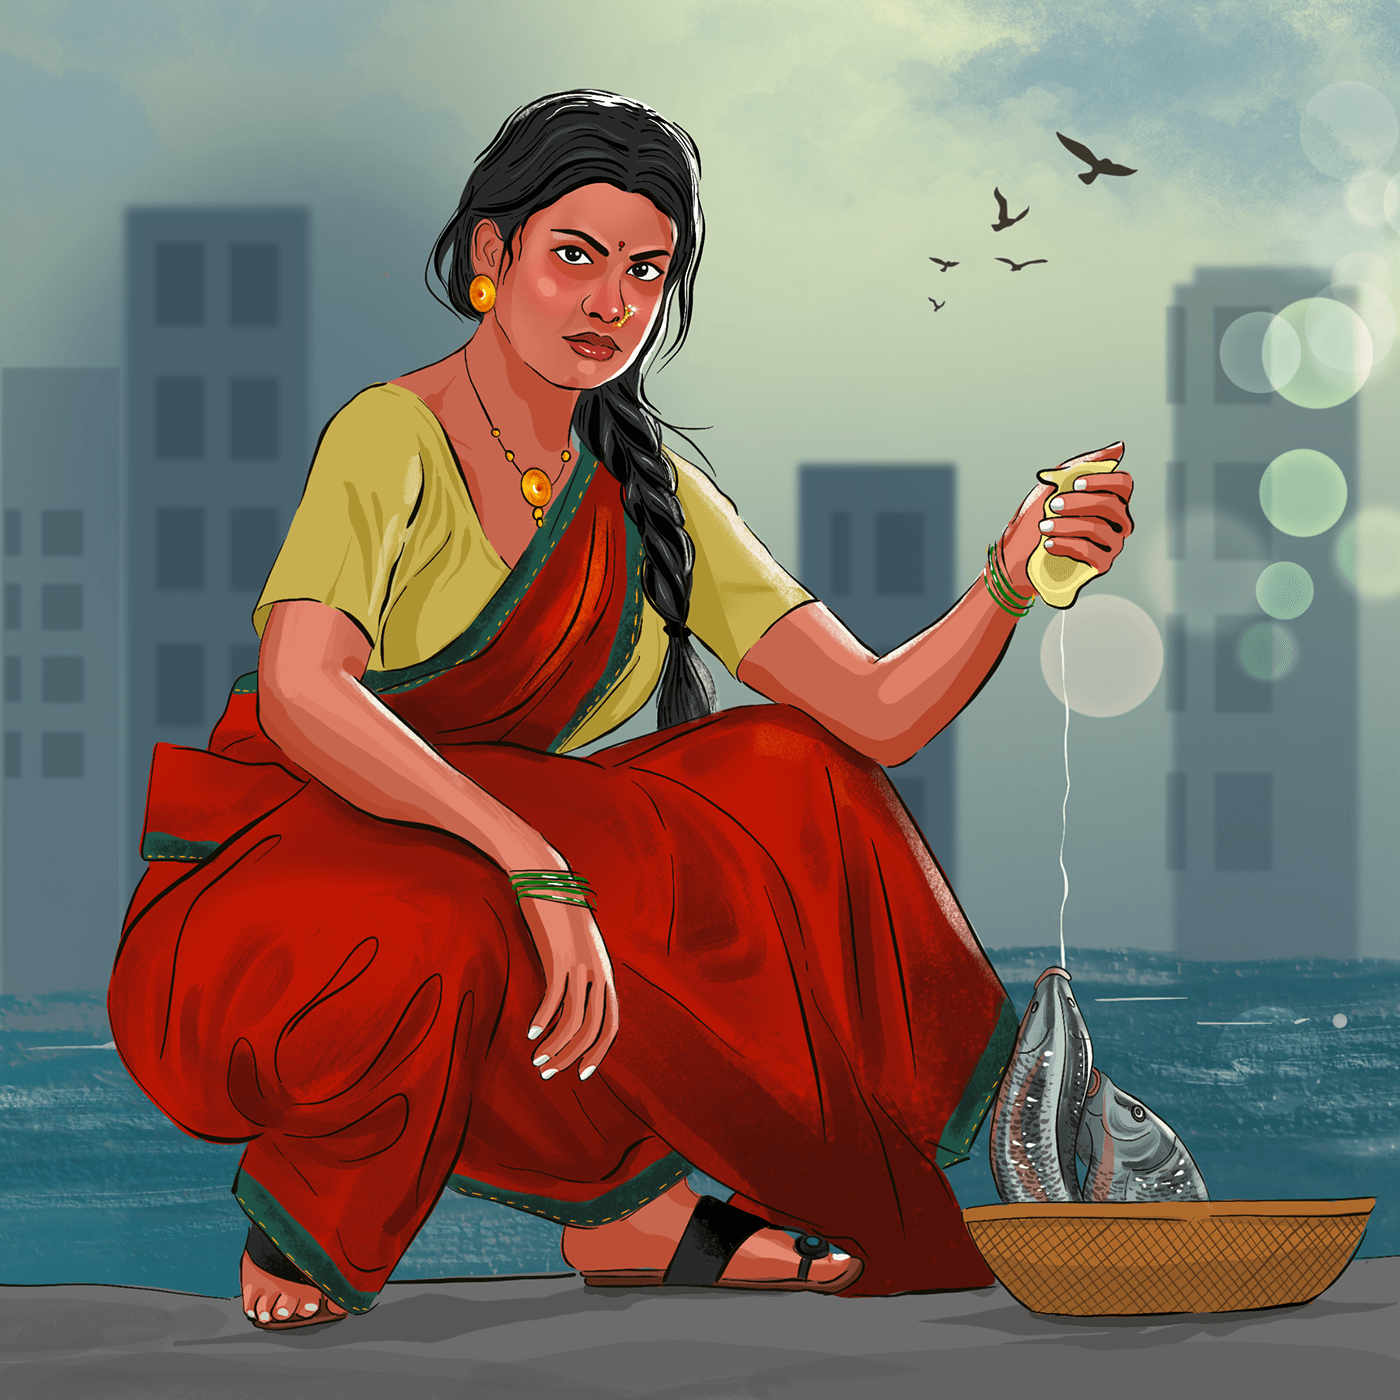 I have tried to portray the beauty of Indian cultural businesses.